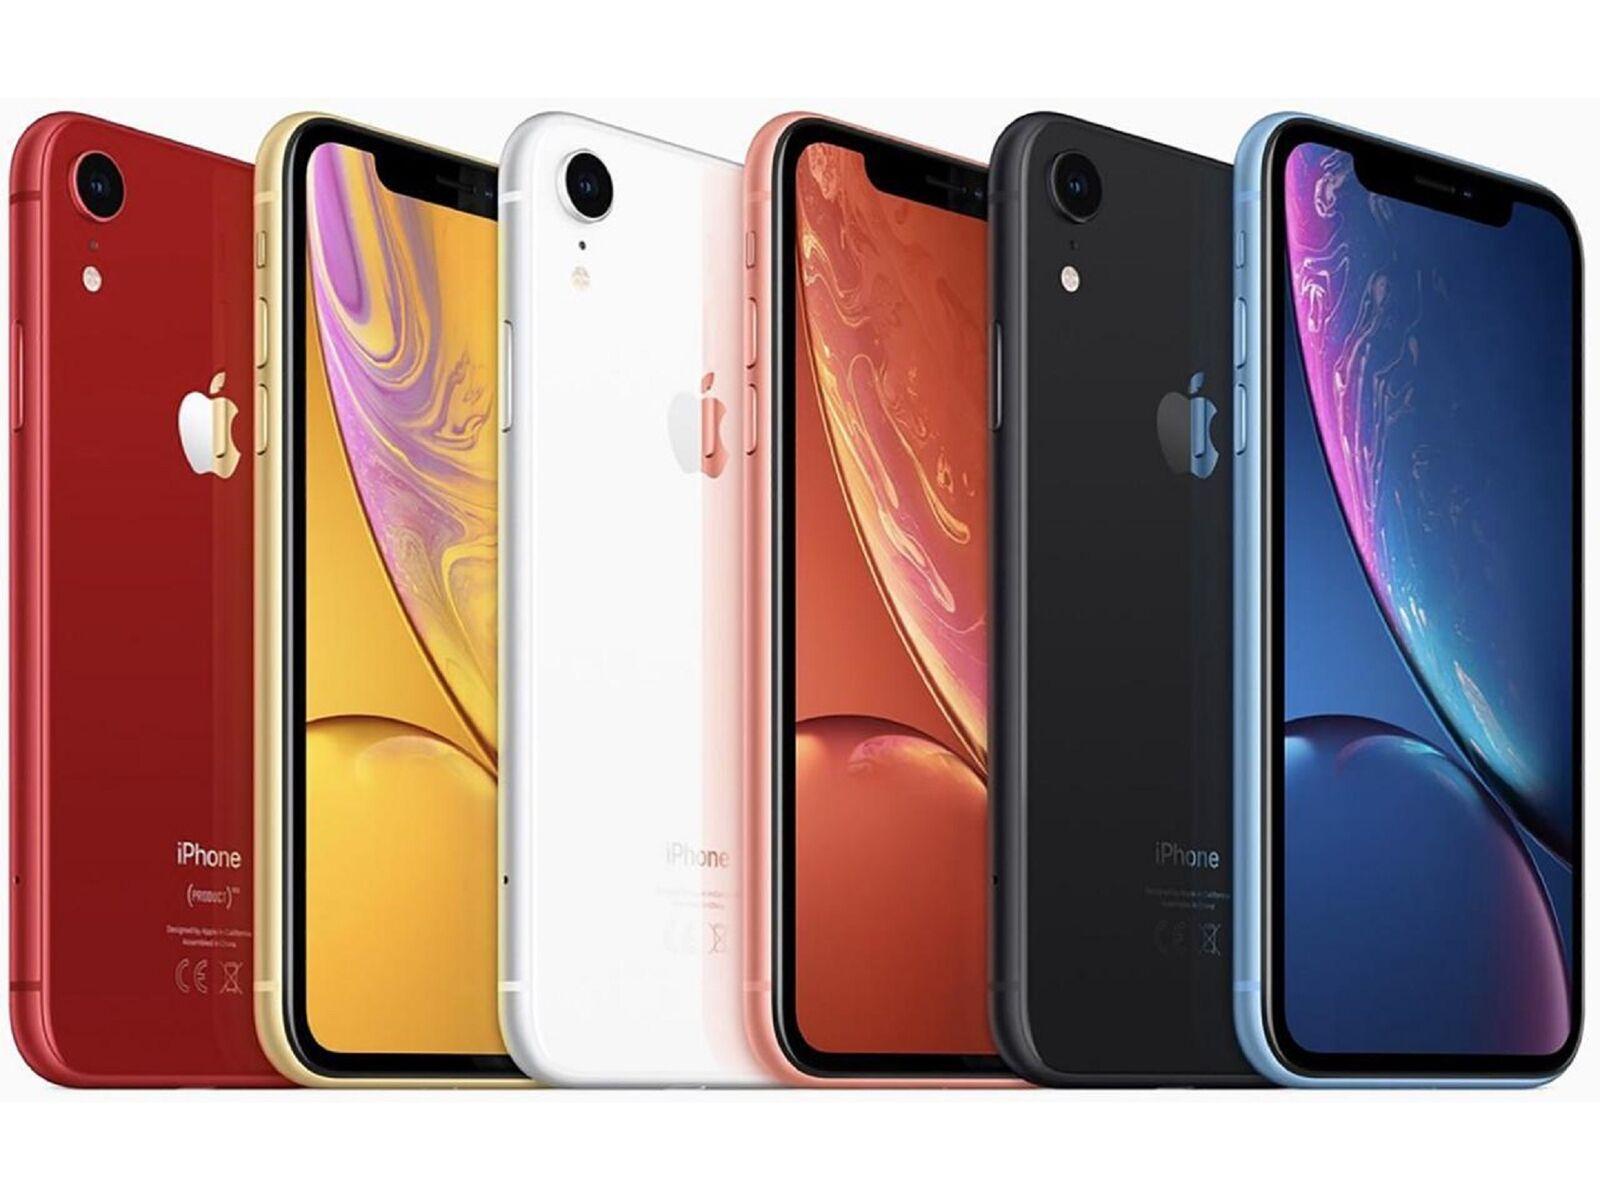 Refurb Apple iPhone XR 64GB Unlocked Smartphone for $264.99 Shipped